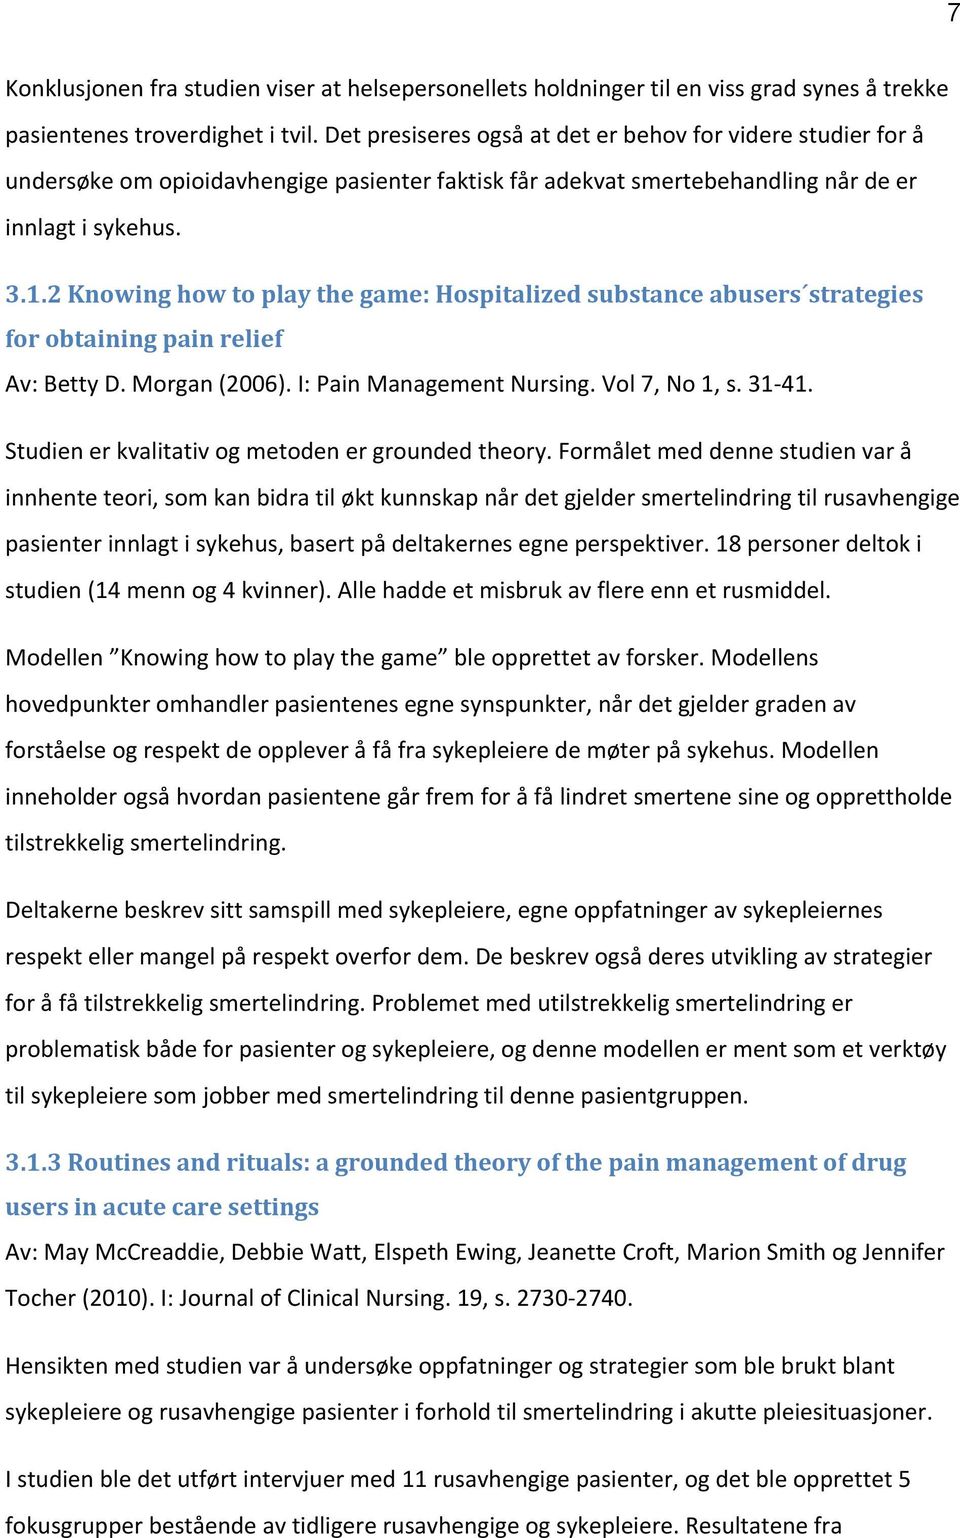 2 Knowing how to play the game: Hospitalized substance abusers strategies for obtaining pain relief Av: Betty D. Morgan (2006). I: Pain Management Nursing. Vol 7, No 1, s. 31-41.